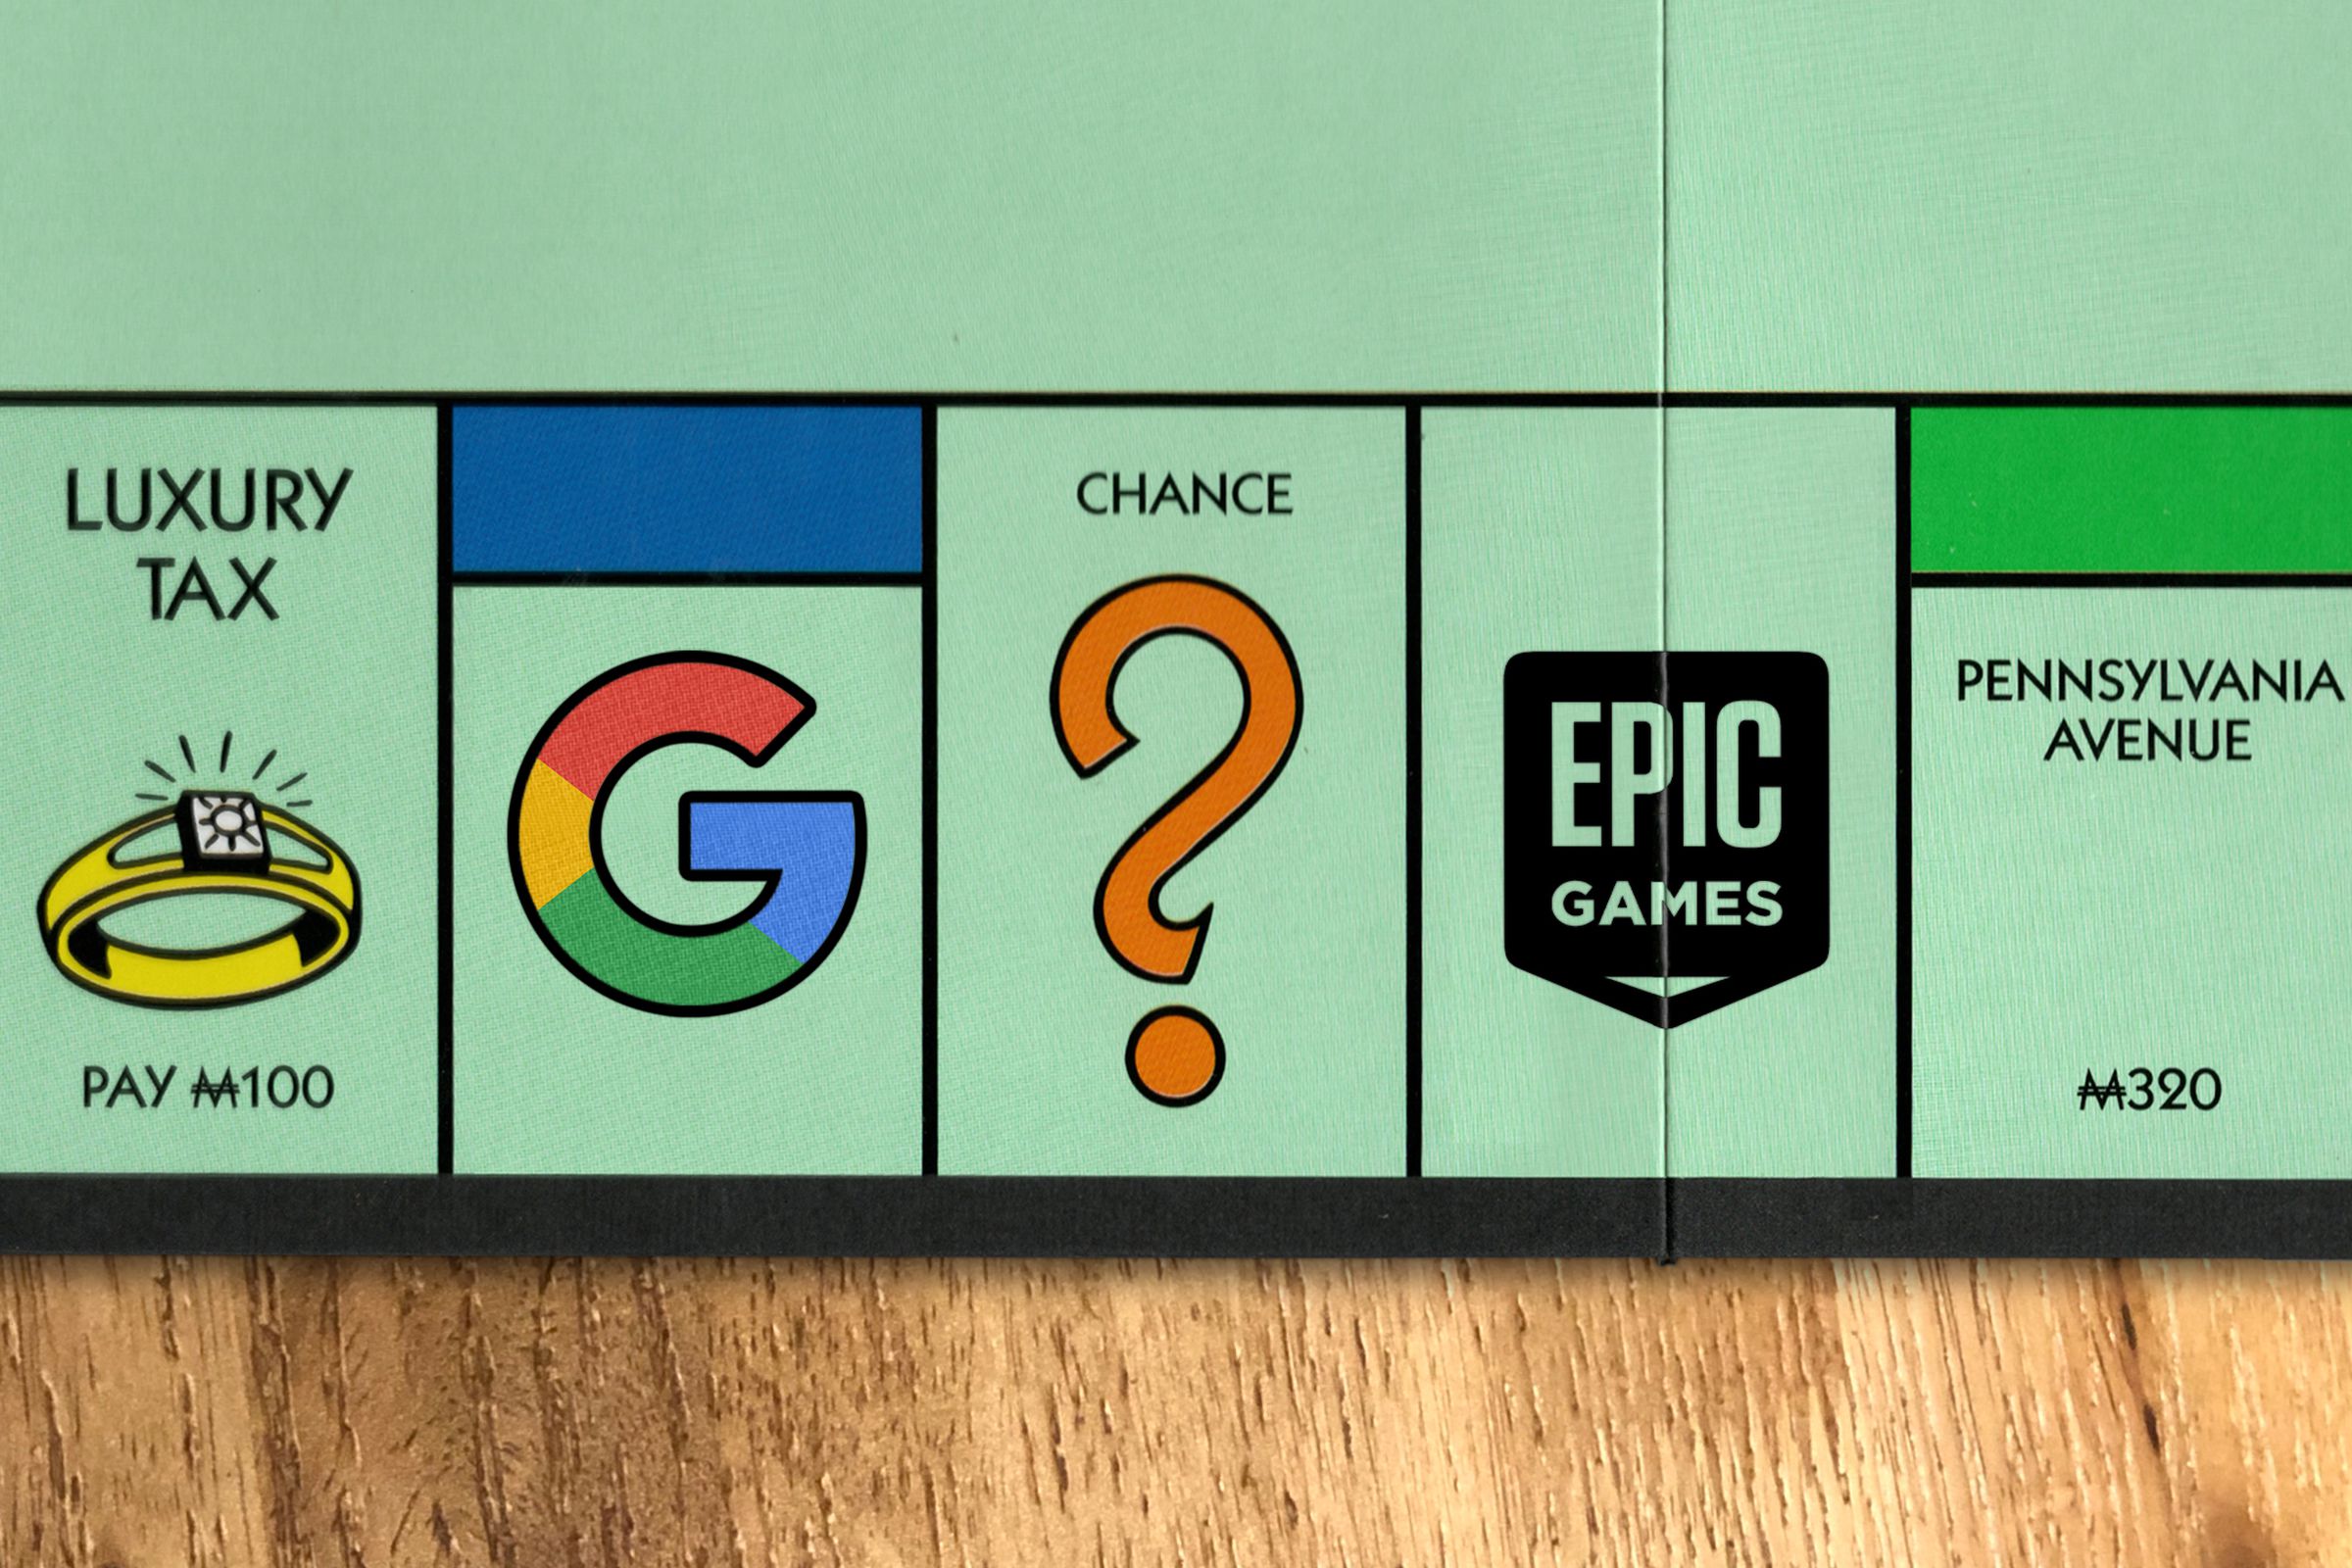 The Google logo and the Epic Games logo photoshopped onto a Monopoly board.